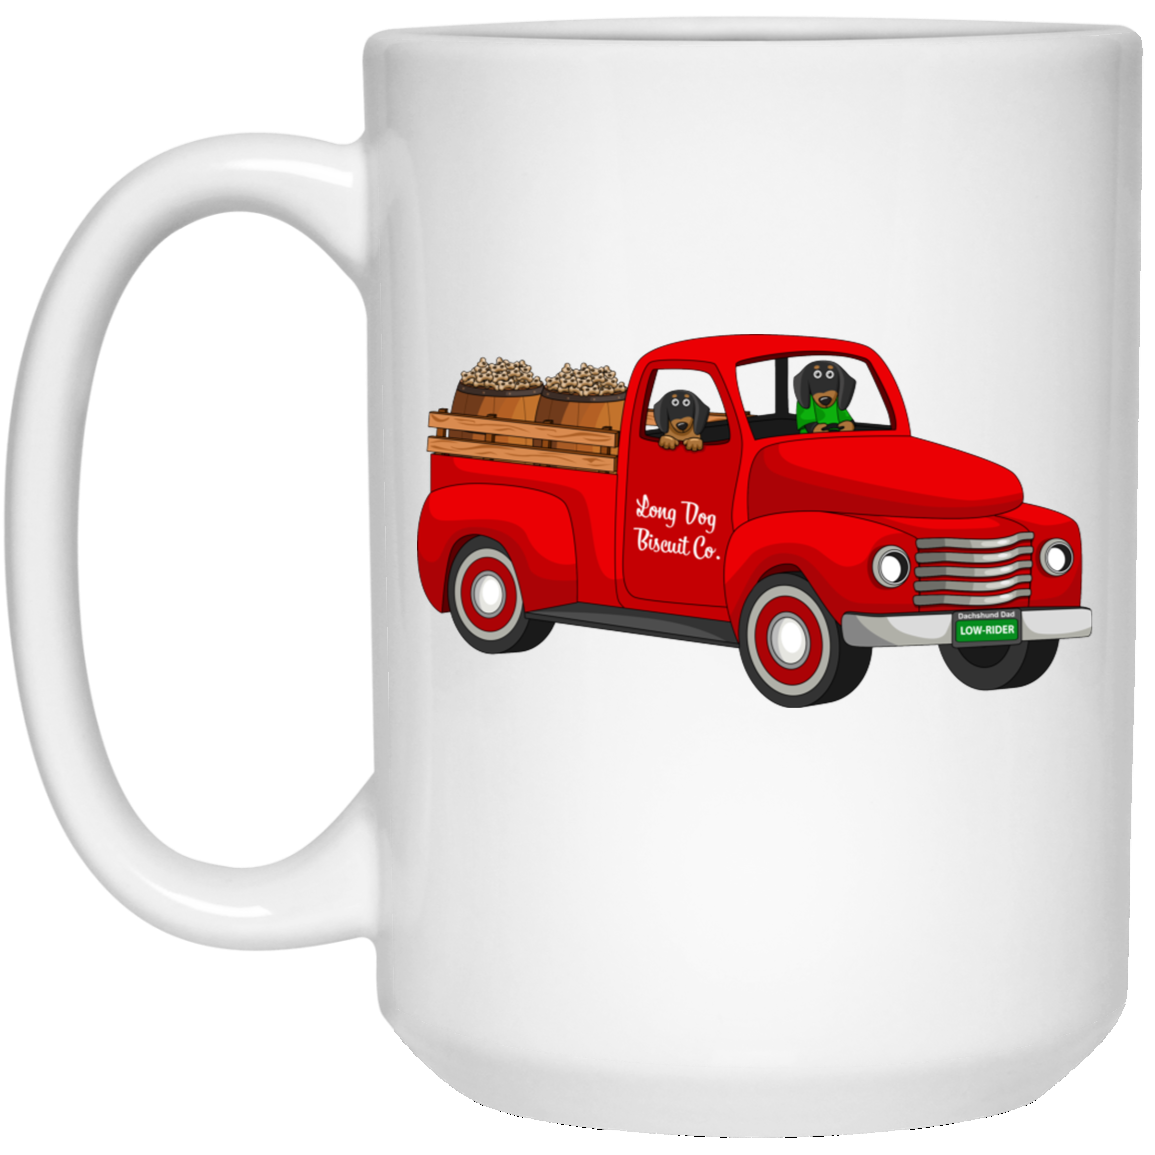 Dachshund Biscuit Truck Black and Tan Dogs Mug